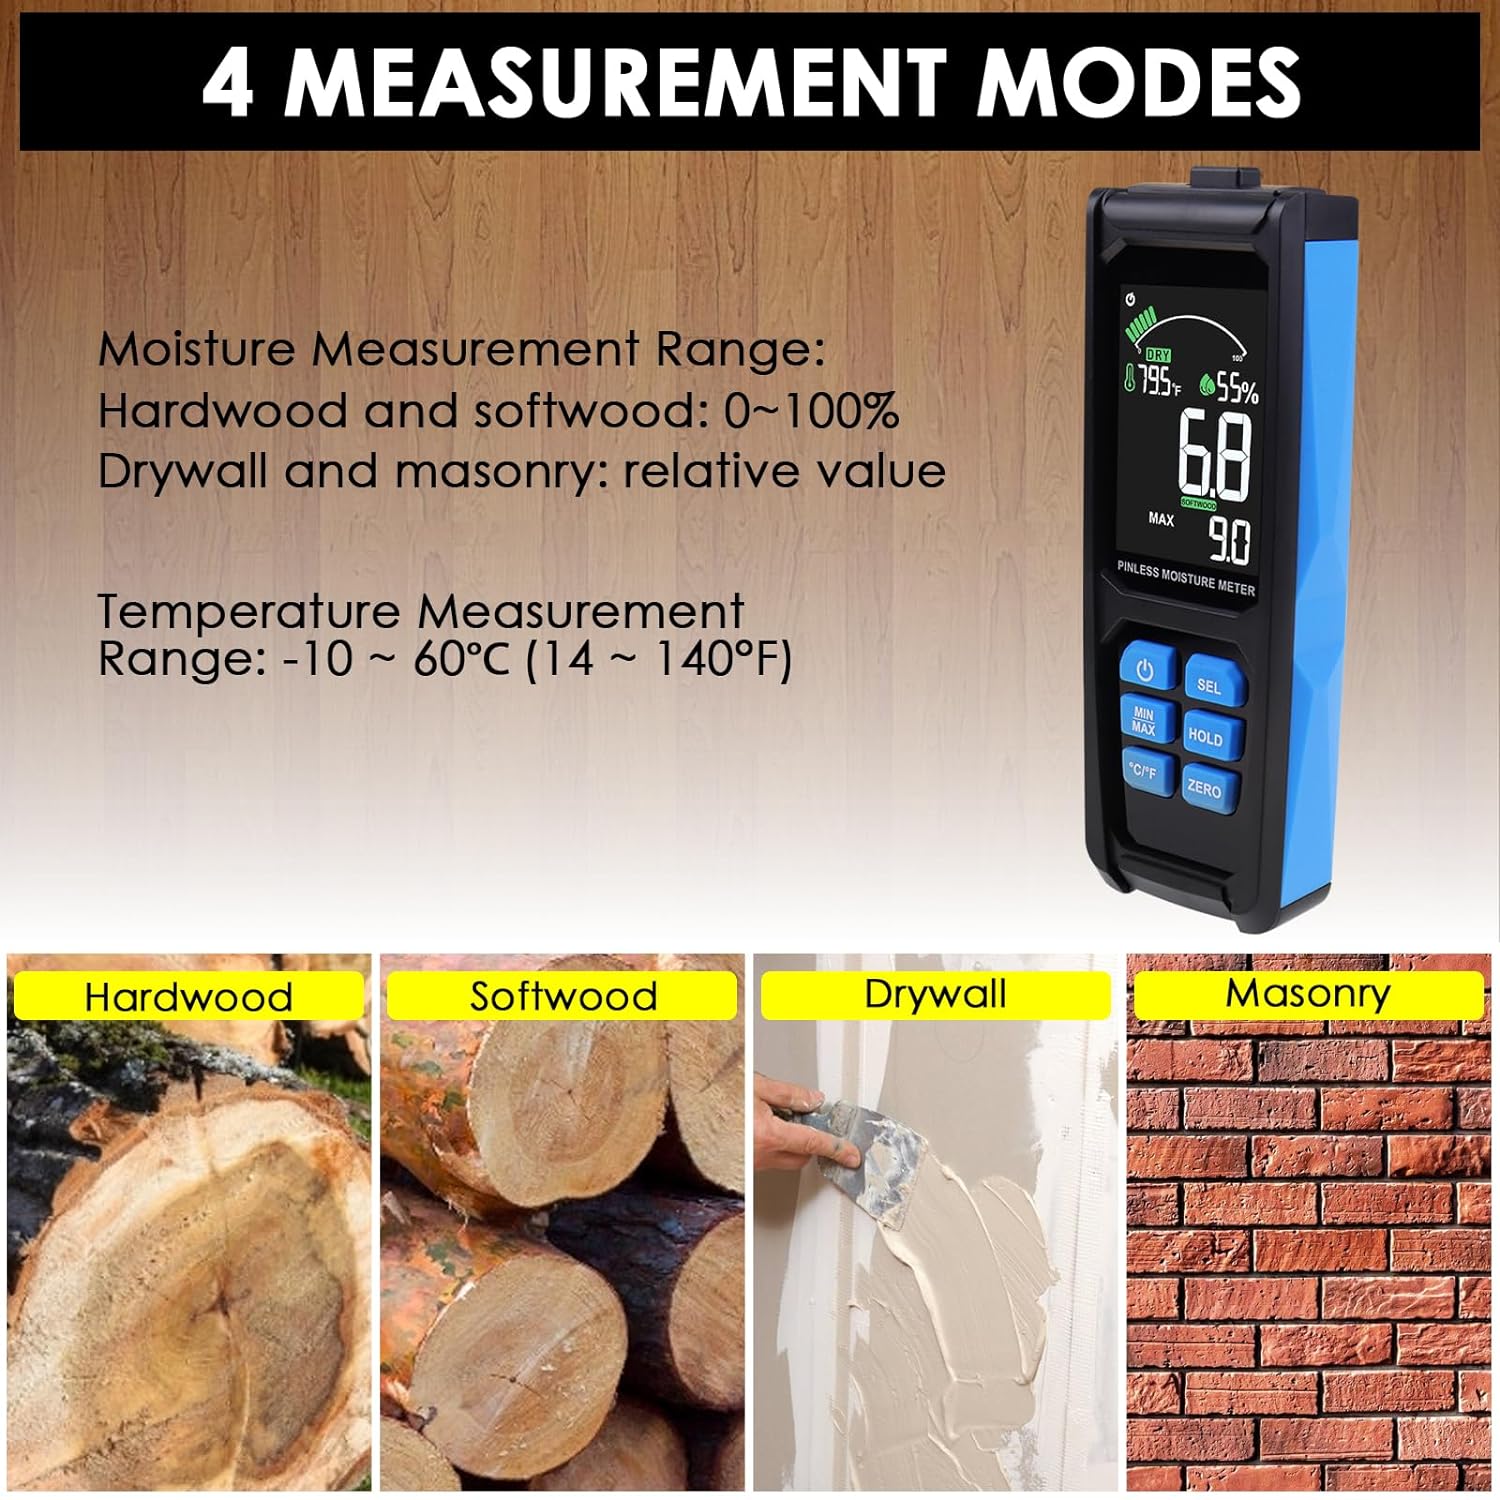 Digital Pinless Wood Moisture Meter with Large Color LCD Display and Multiple Mode Options for Wood, Wall, Plaster, and Masonry – Non-Destructive with Visual and Audible Alerts